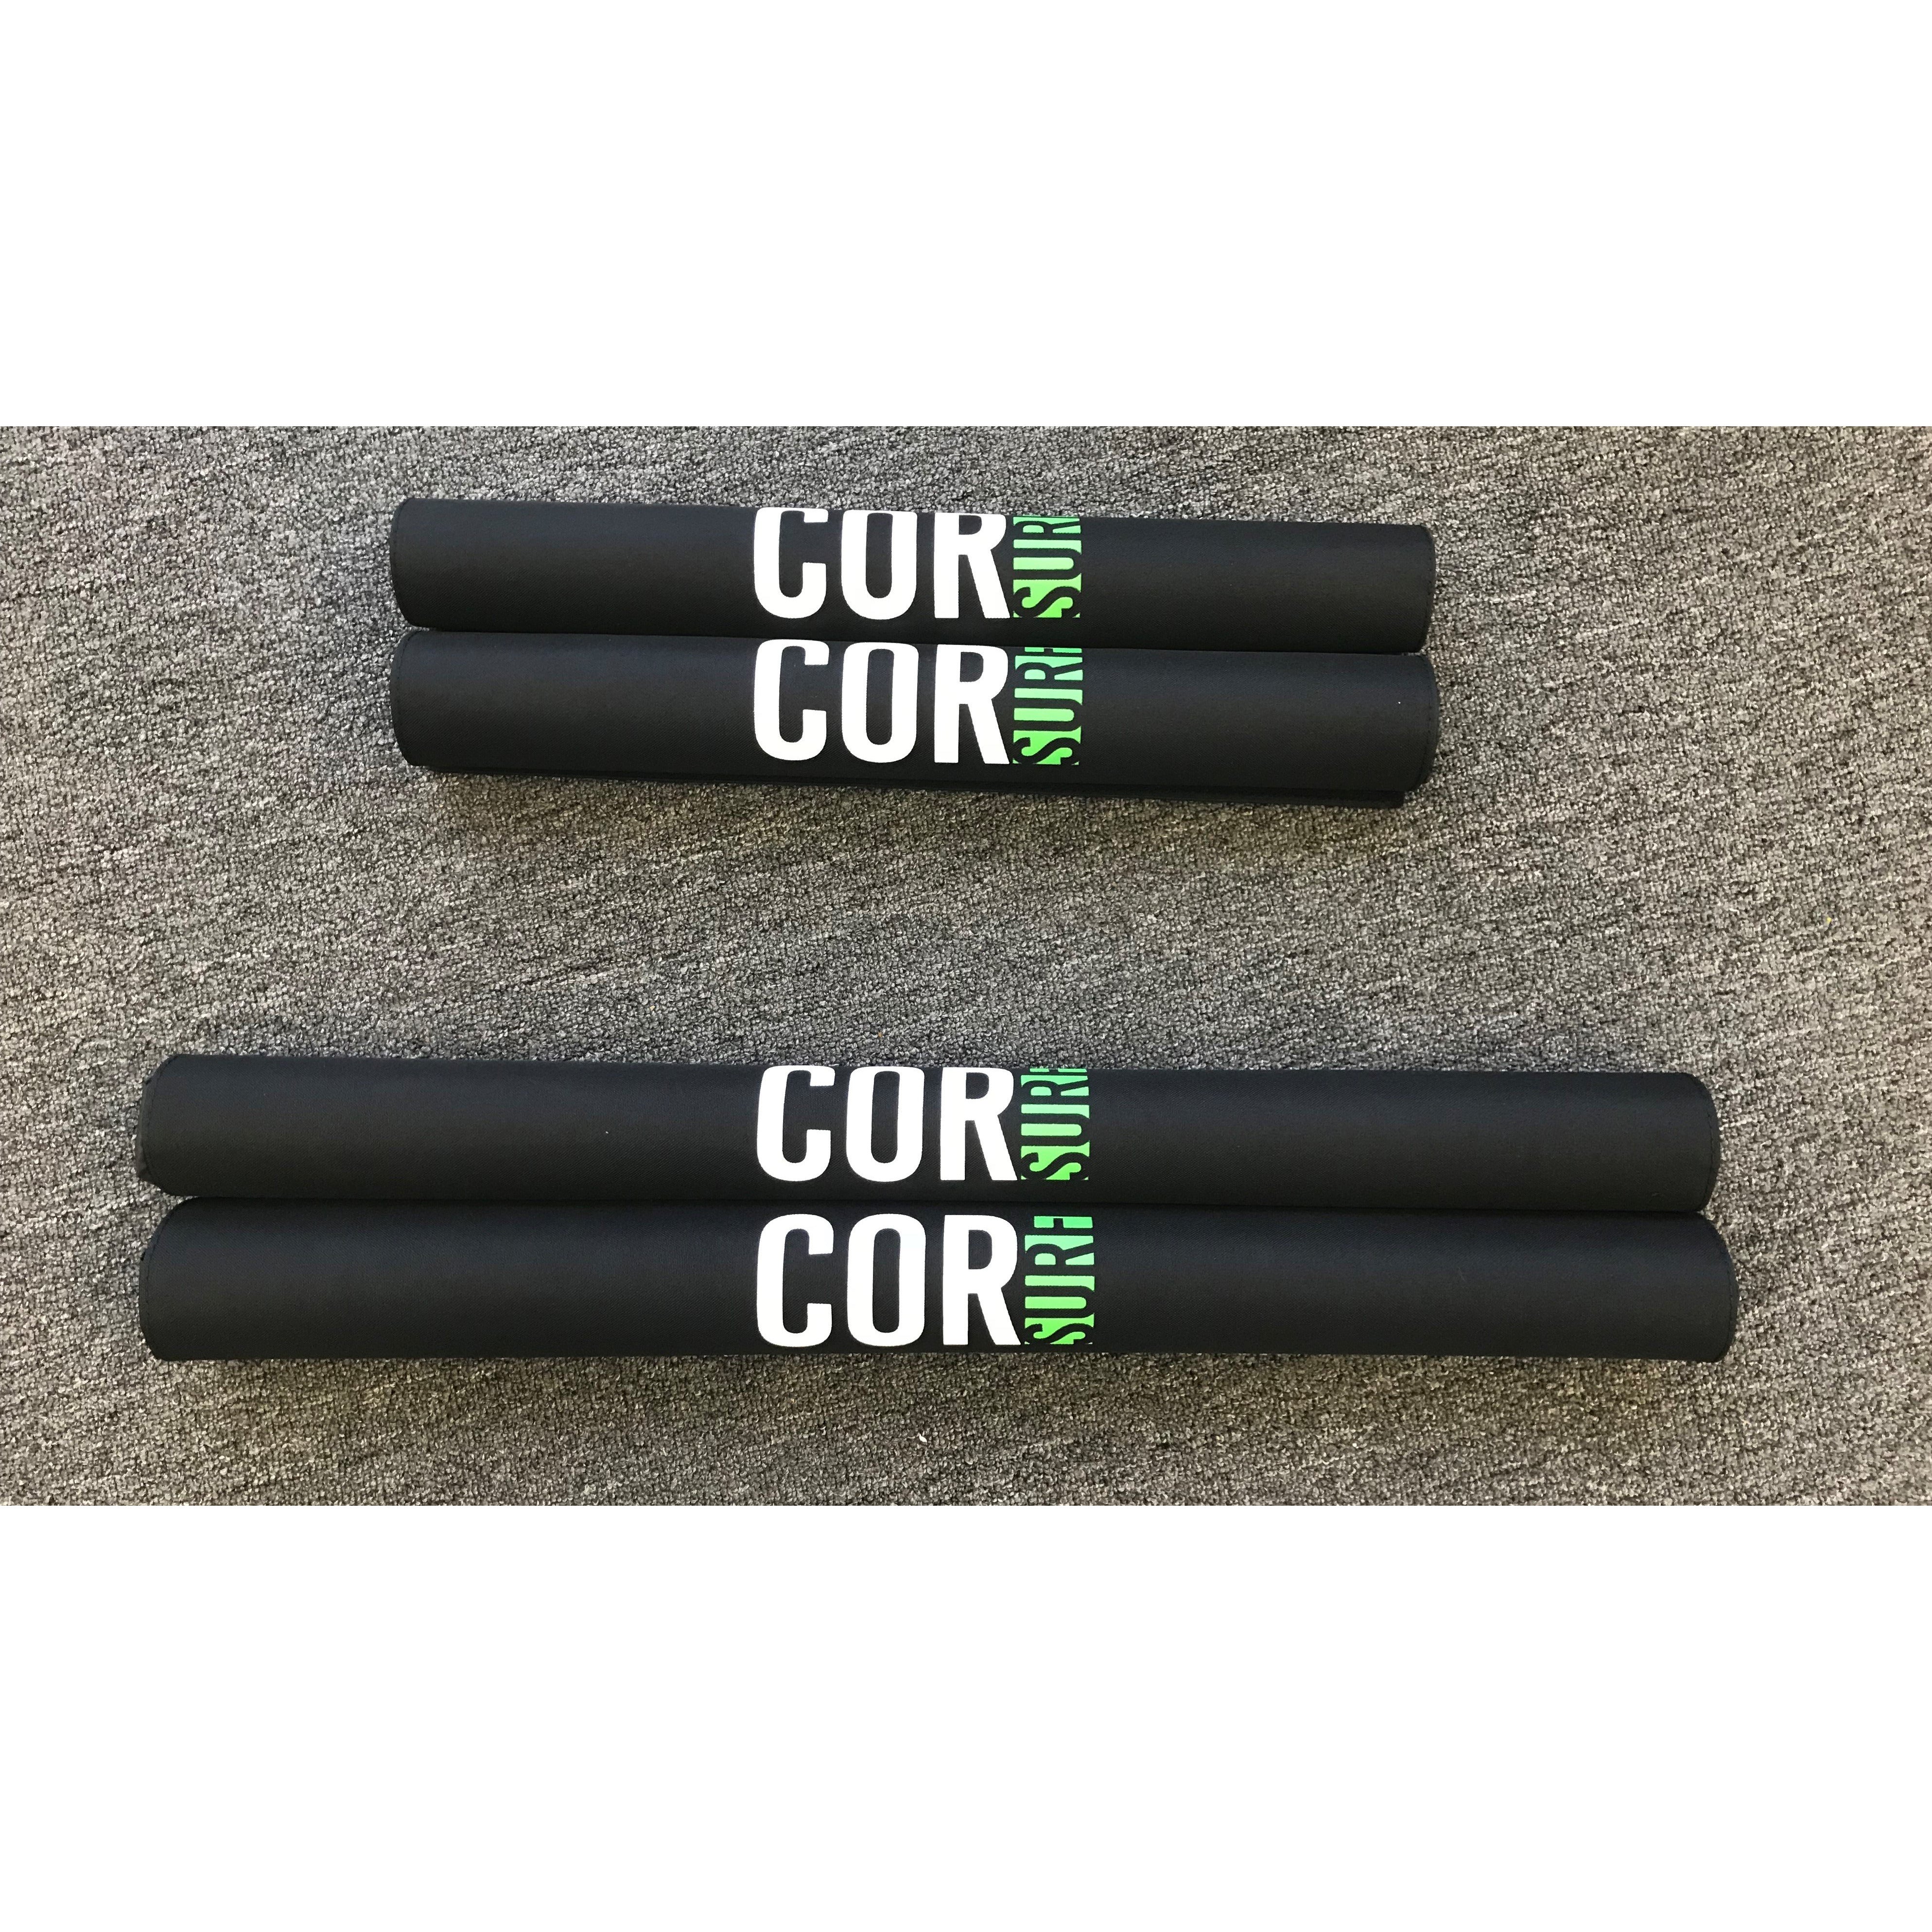 Round Roof Rack Pads for Surf and SUP | Long 28" or Short 19"